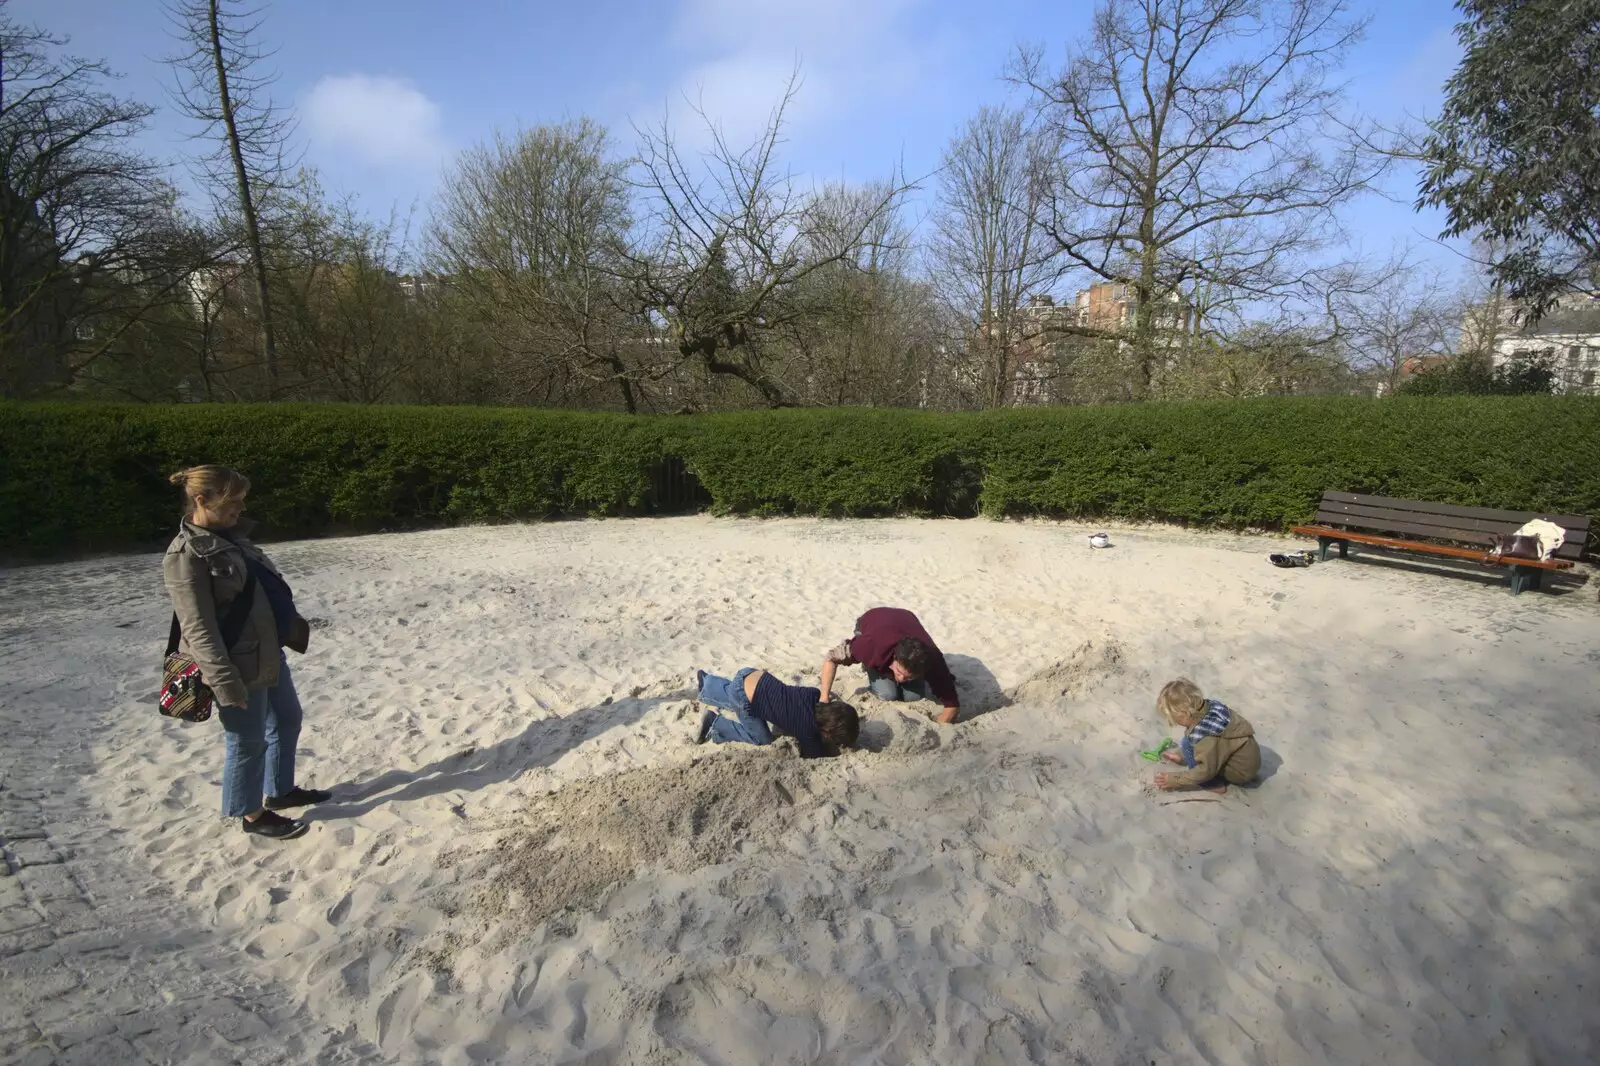 The boys are in a Brussel's sand pit, from A Day Trip to Brussels, Belgium - 5th April 2009